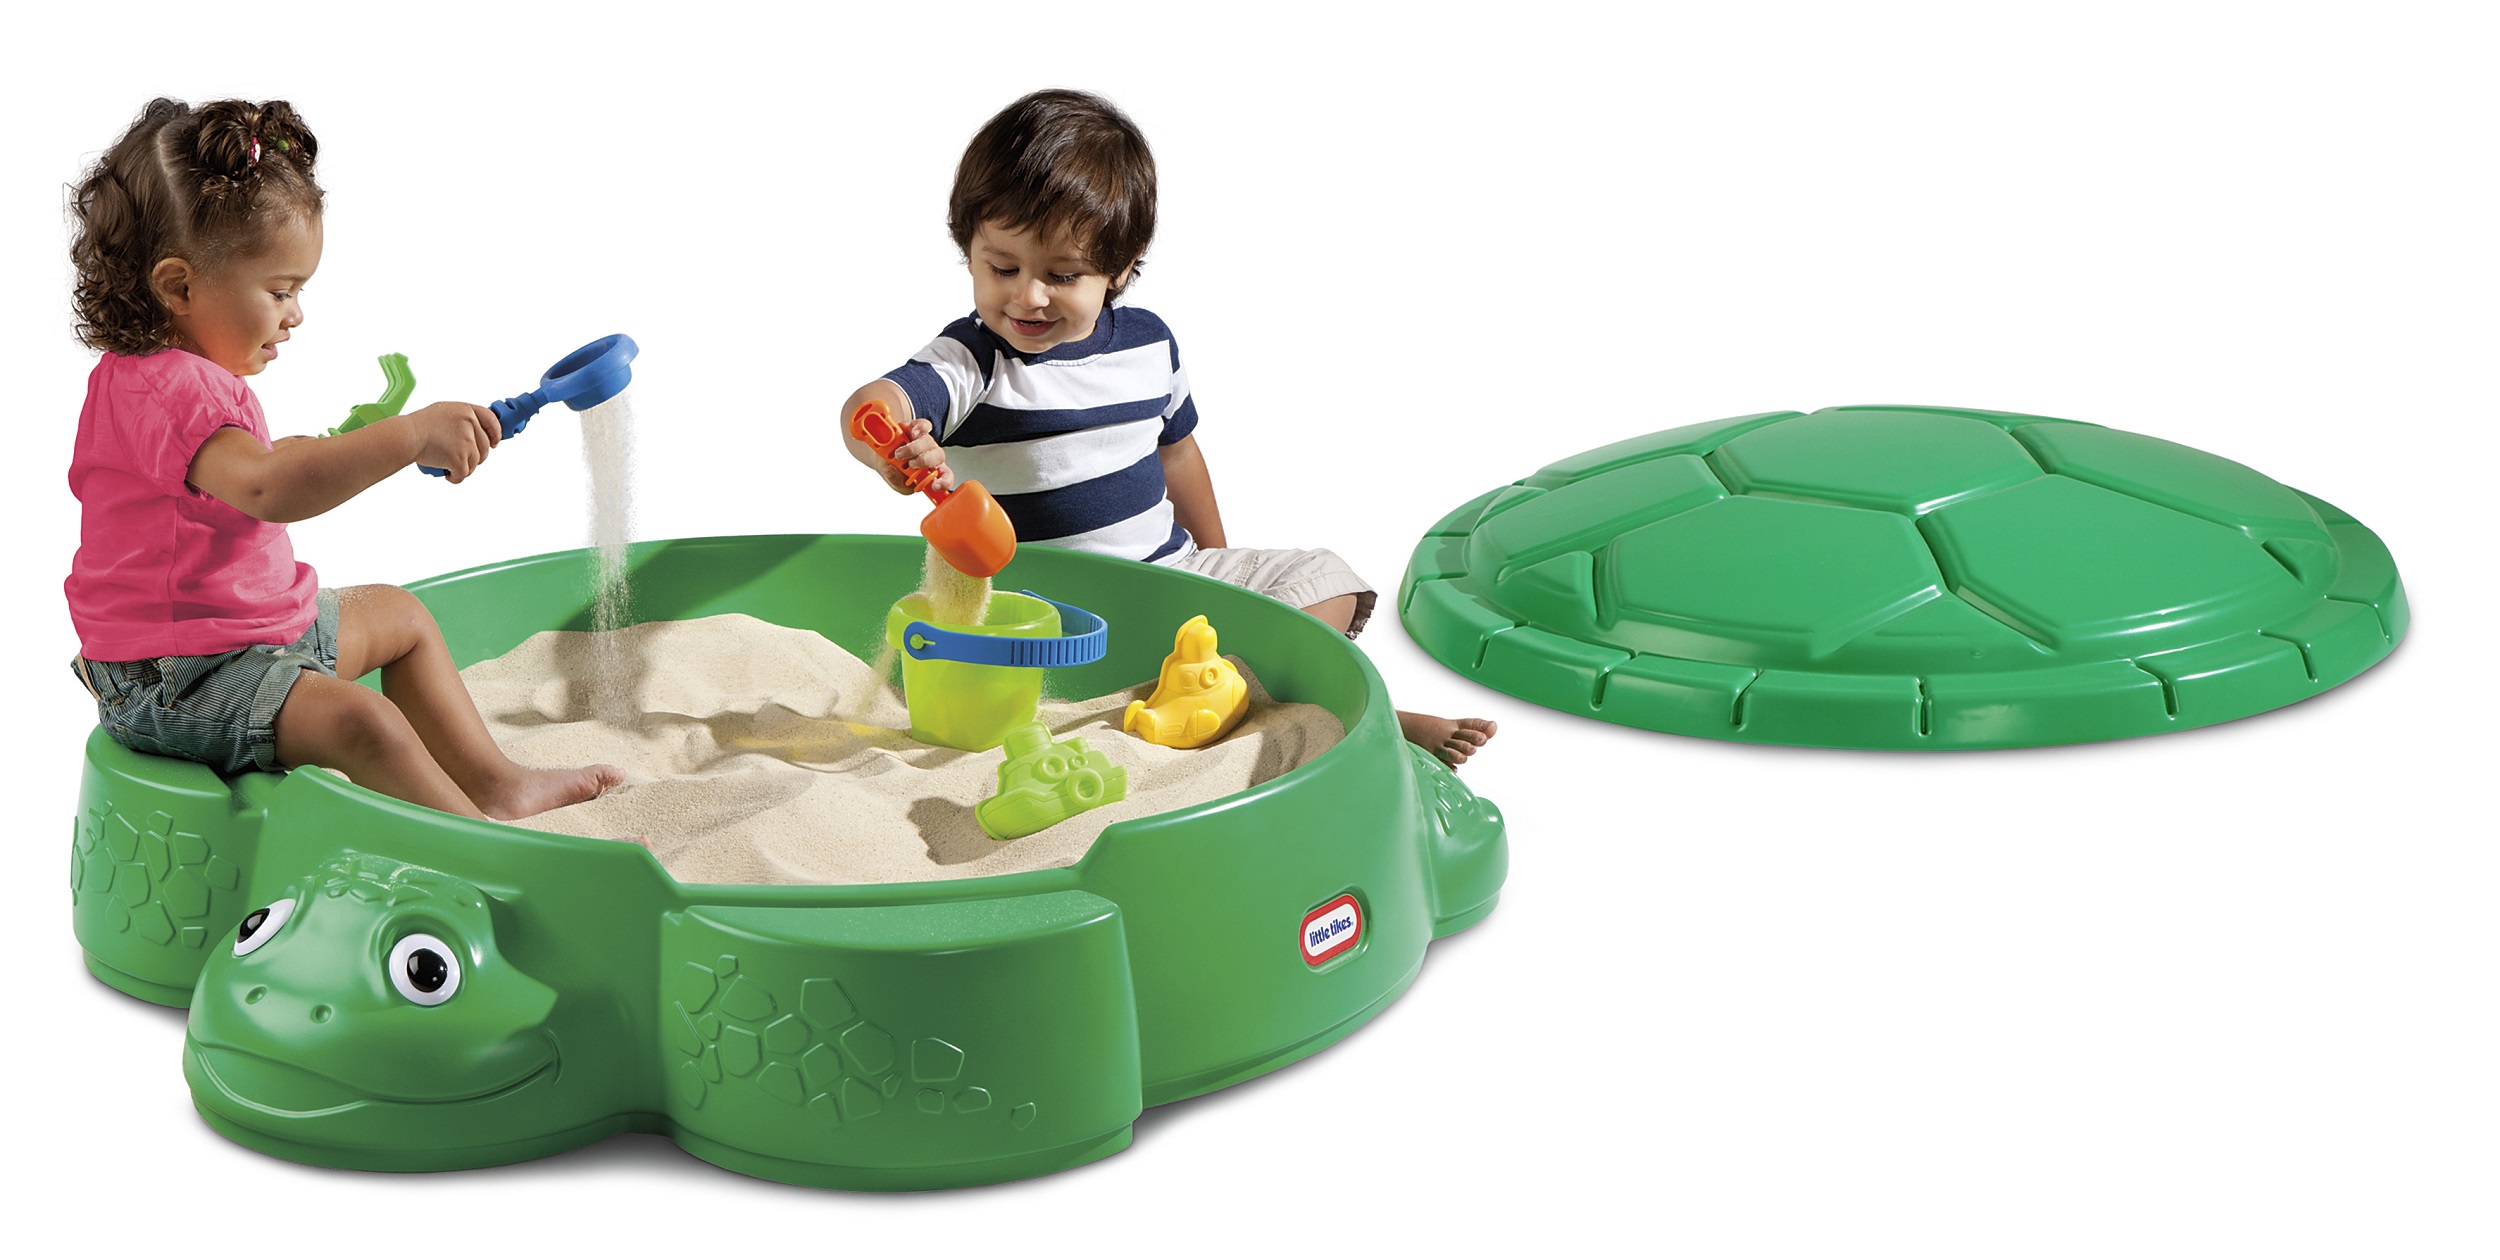 Little Tikes Turtle Sandbox with Removable Lid - image 1 of 5